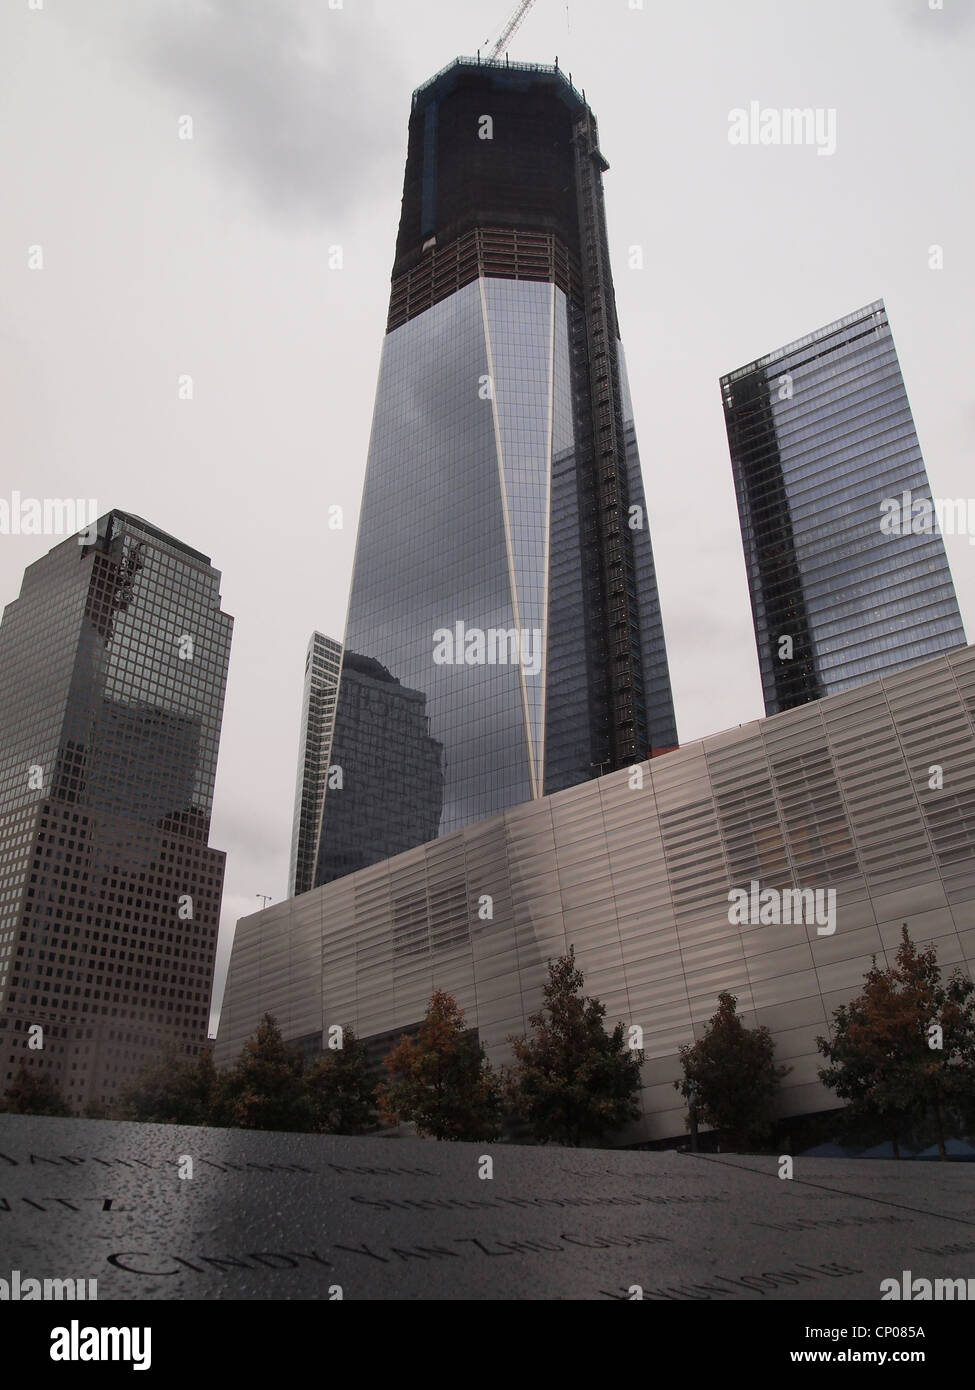 Partially built 1 WTC Freedom Tower in background of 9/11 Memorial in New York City, October 12, 2011, © Katharine Andriotis Stock Photo